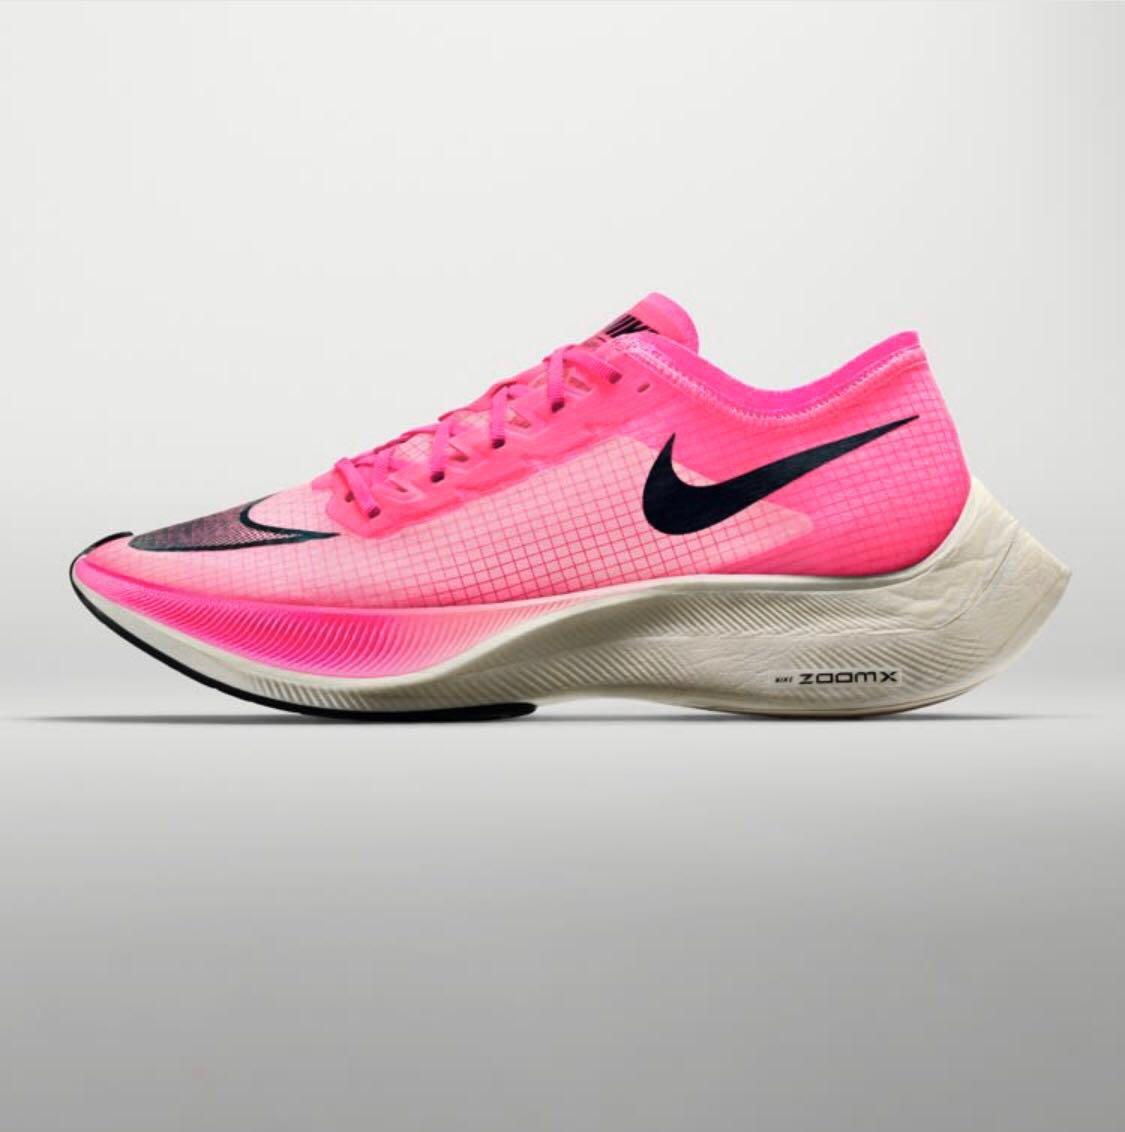 Nike's ZoomX Vaporfly Next% PINK 